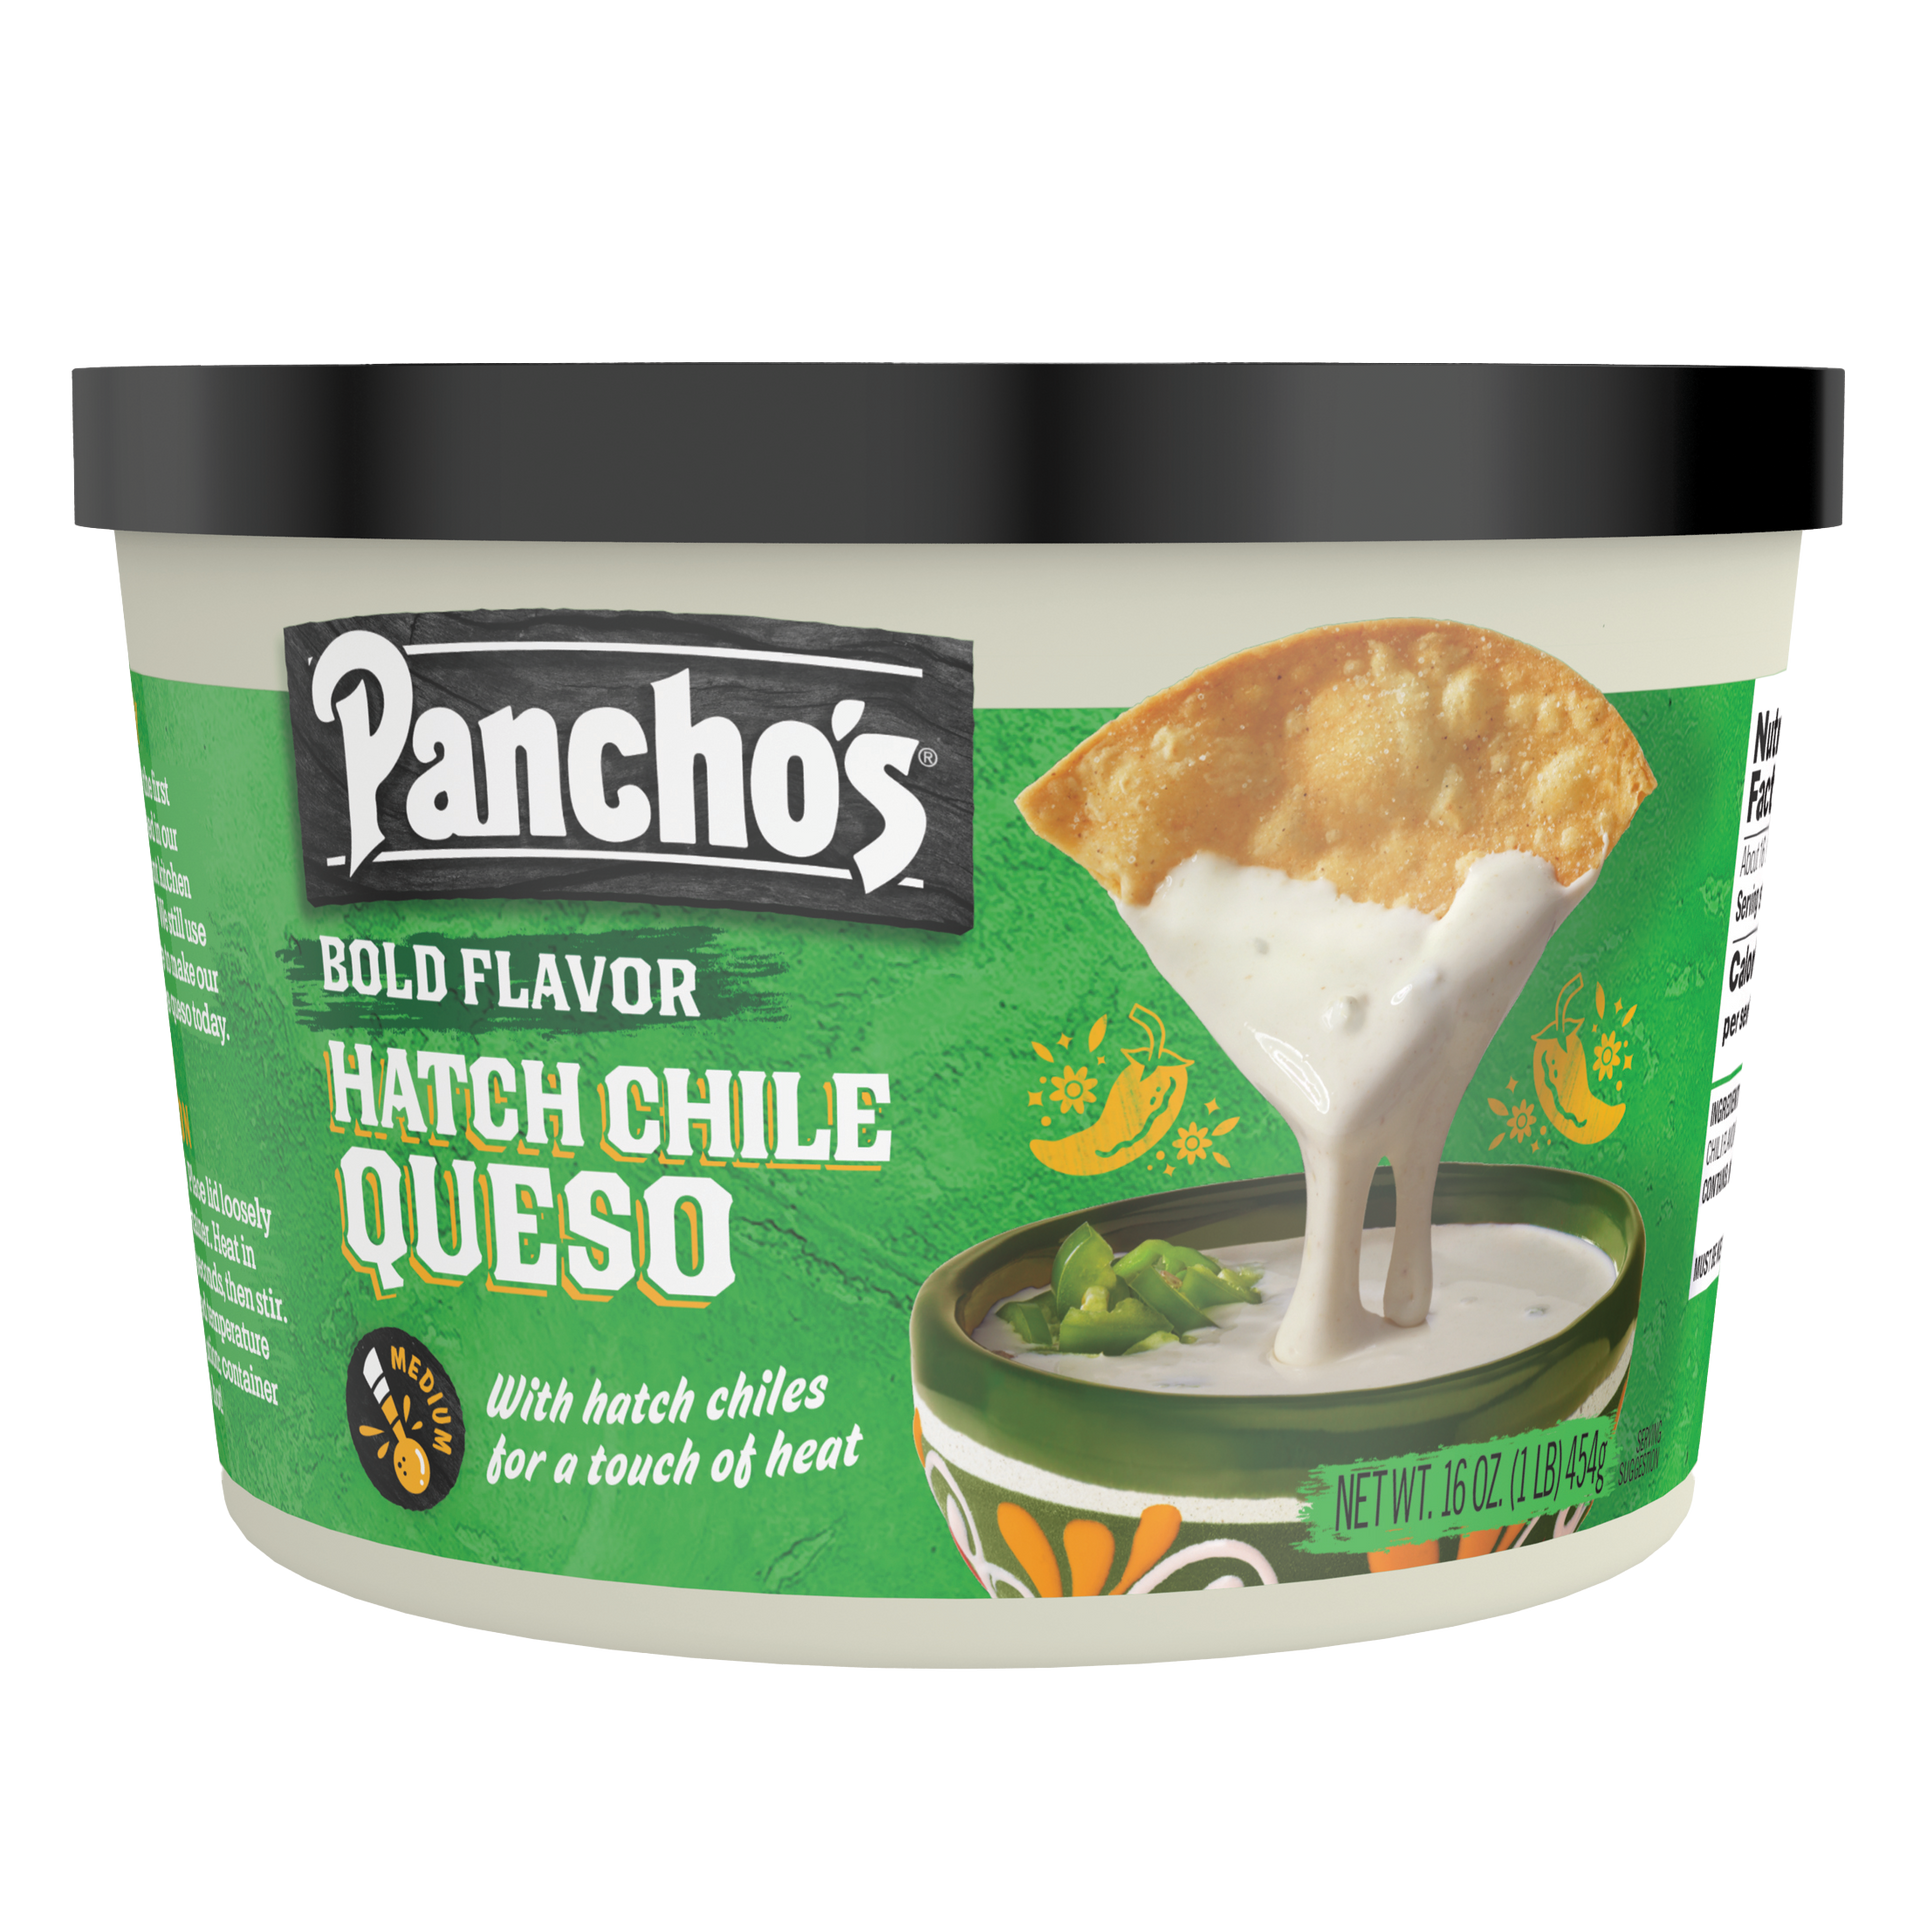 Pancho's Hatch Chile Queso Product Image